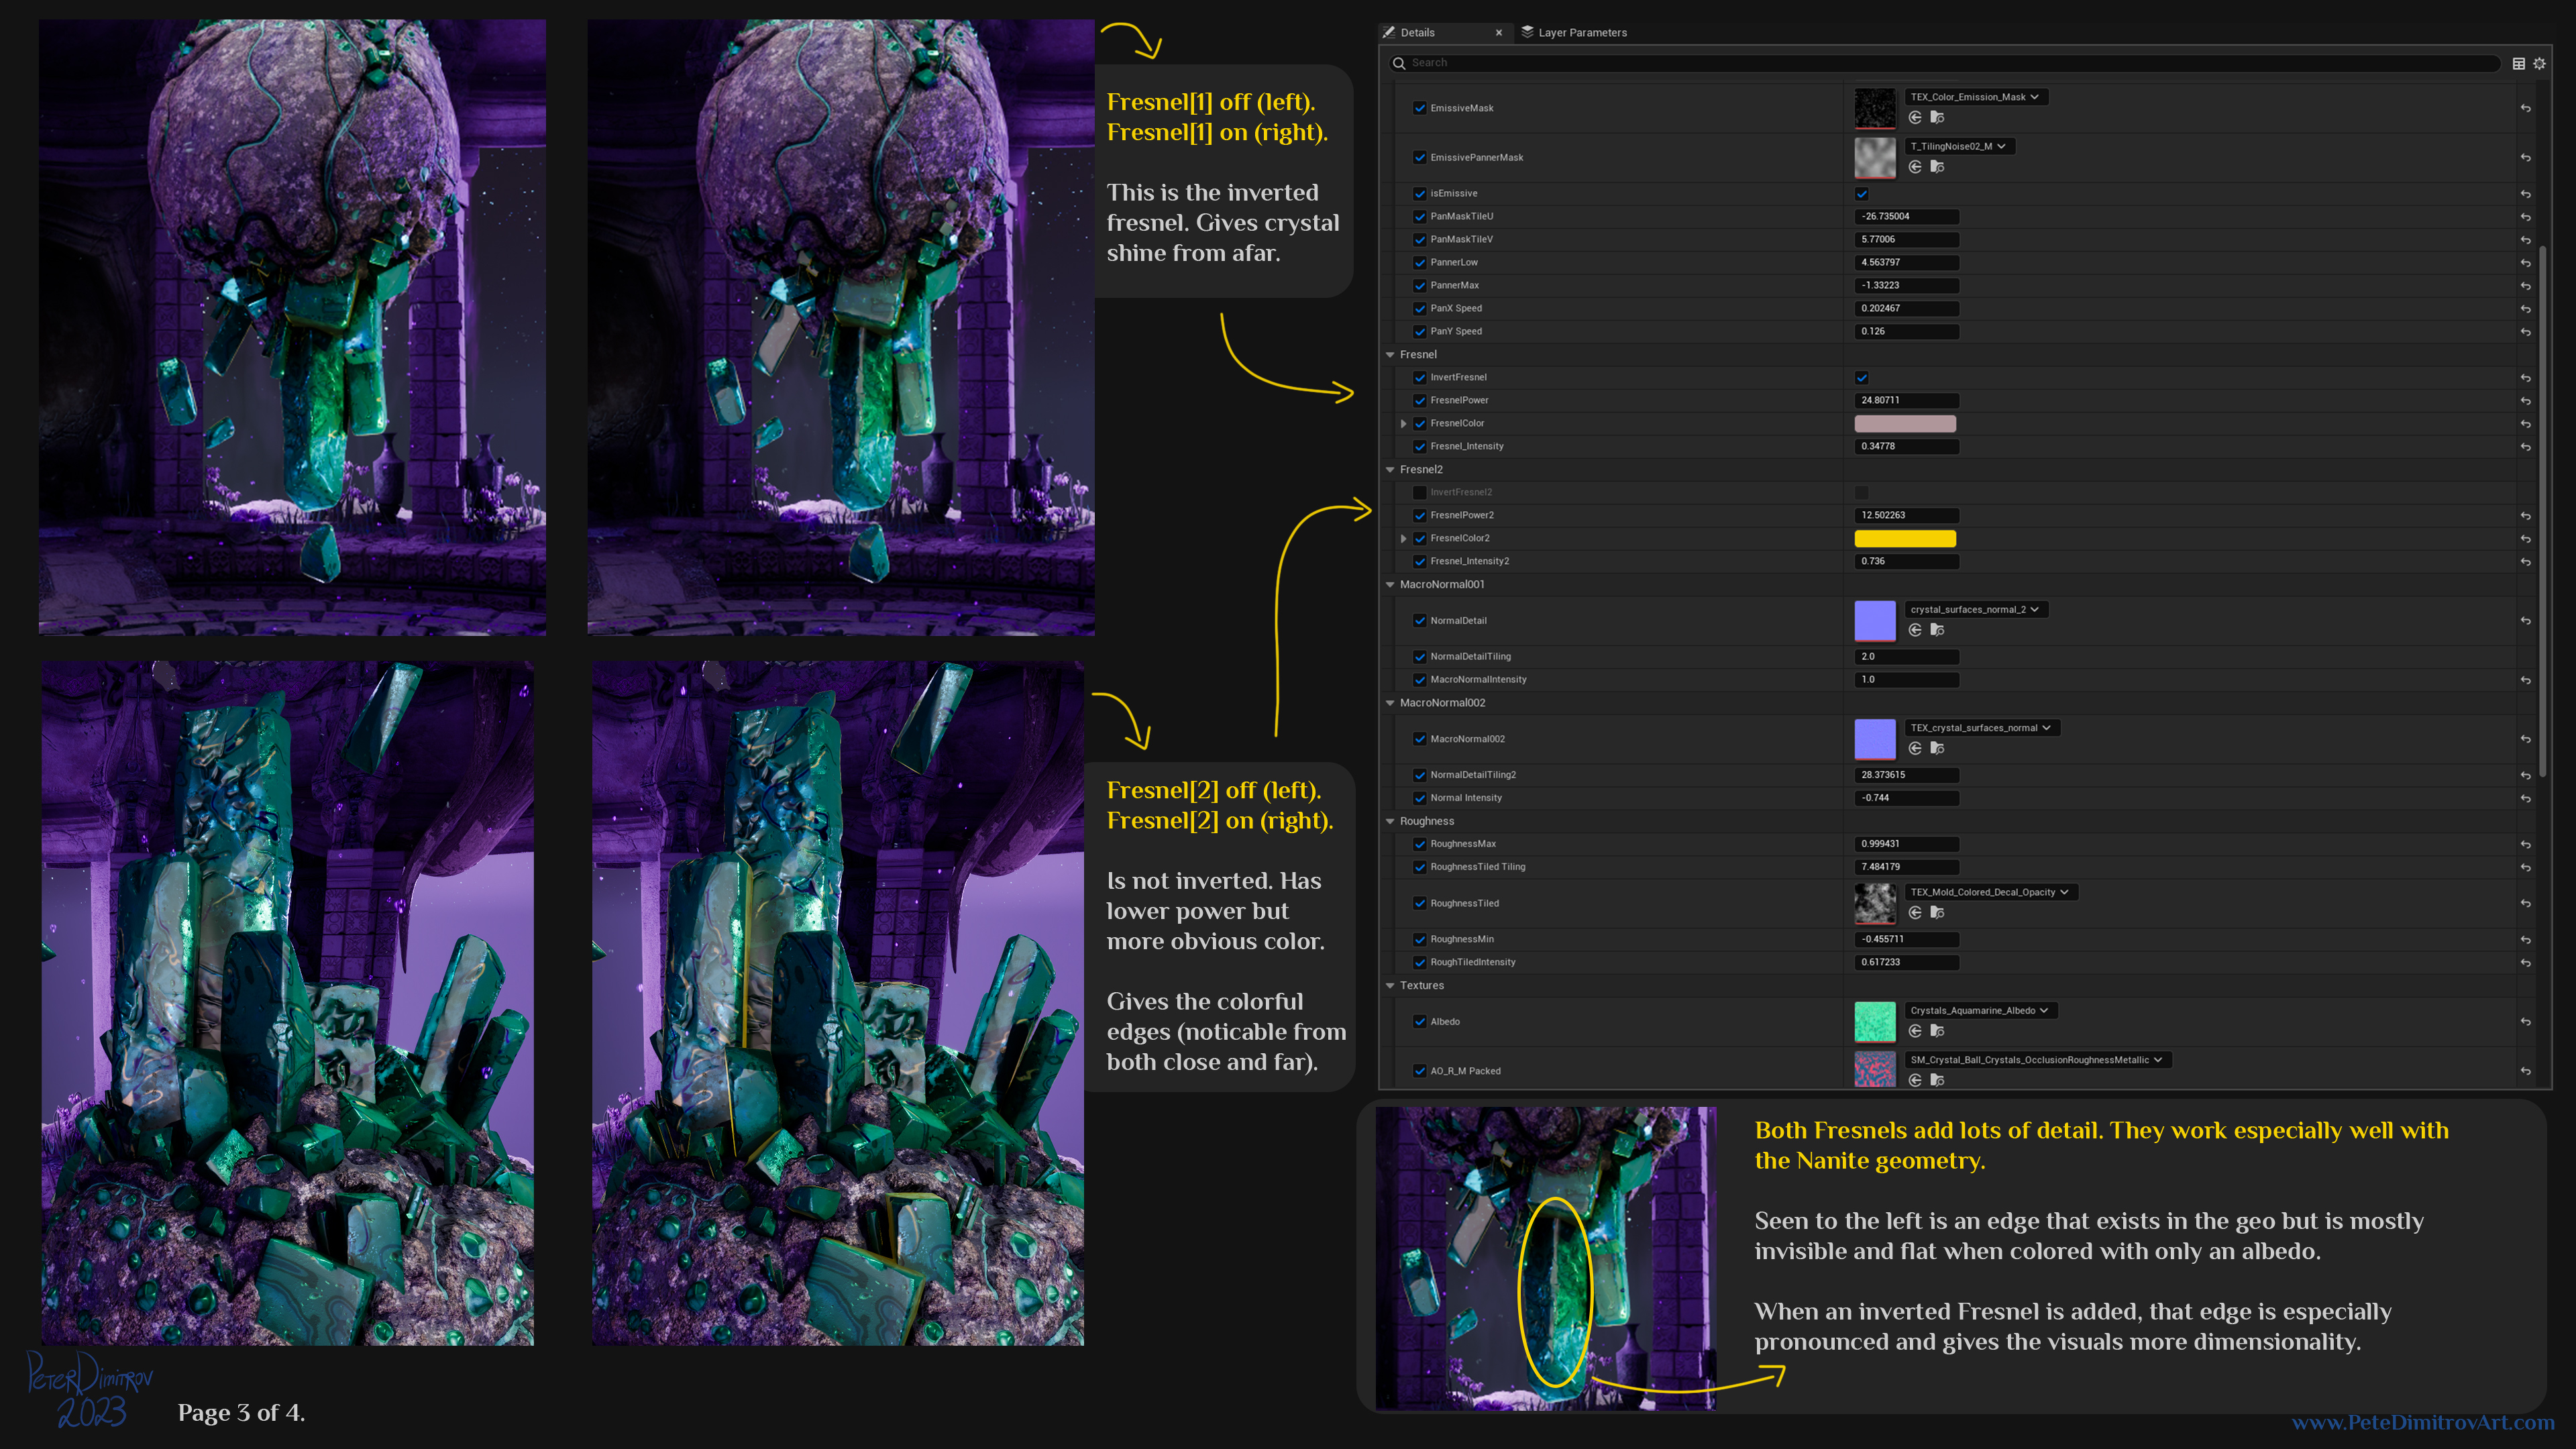 Another image collage (third one). Here there are 5 purple screenshots. They show different parts of the crystal prop that is now tinted in green and teal hues. The background of the scene is in deep purples. This slide showcases the fresnels used in the shaders. If one zooms close onto the green crystal and compares the different images, the fresnels can be seen giving bright contour and extra dimension to the artwork. Yellow arrows point on a screenshot of the material settings and the different parameters. Text is transcribed below.